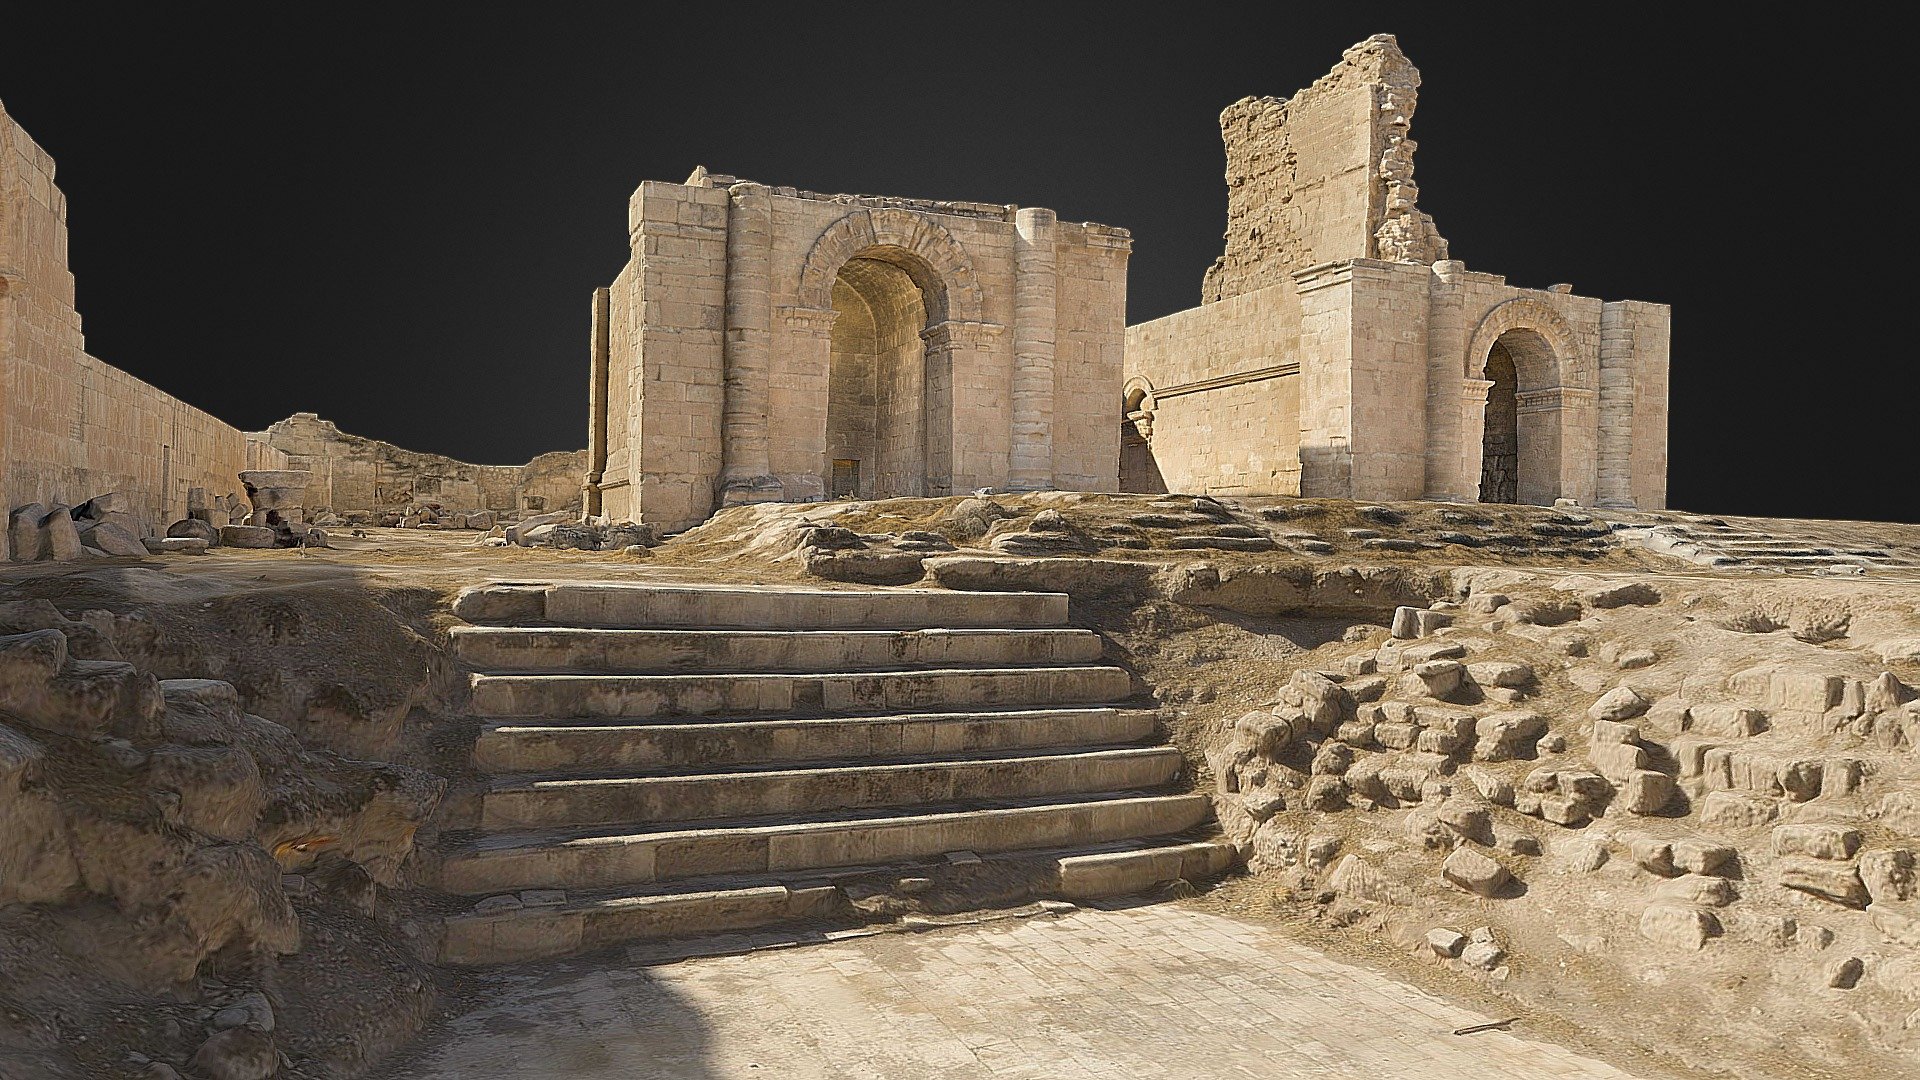 3D model of the Temple of the Triads in Hatra, and some surrounding architectonical elements - Hatra - Temple of the Triads - 3D model by ATS 3d model